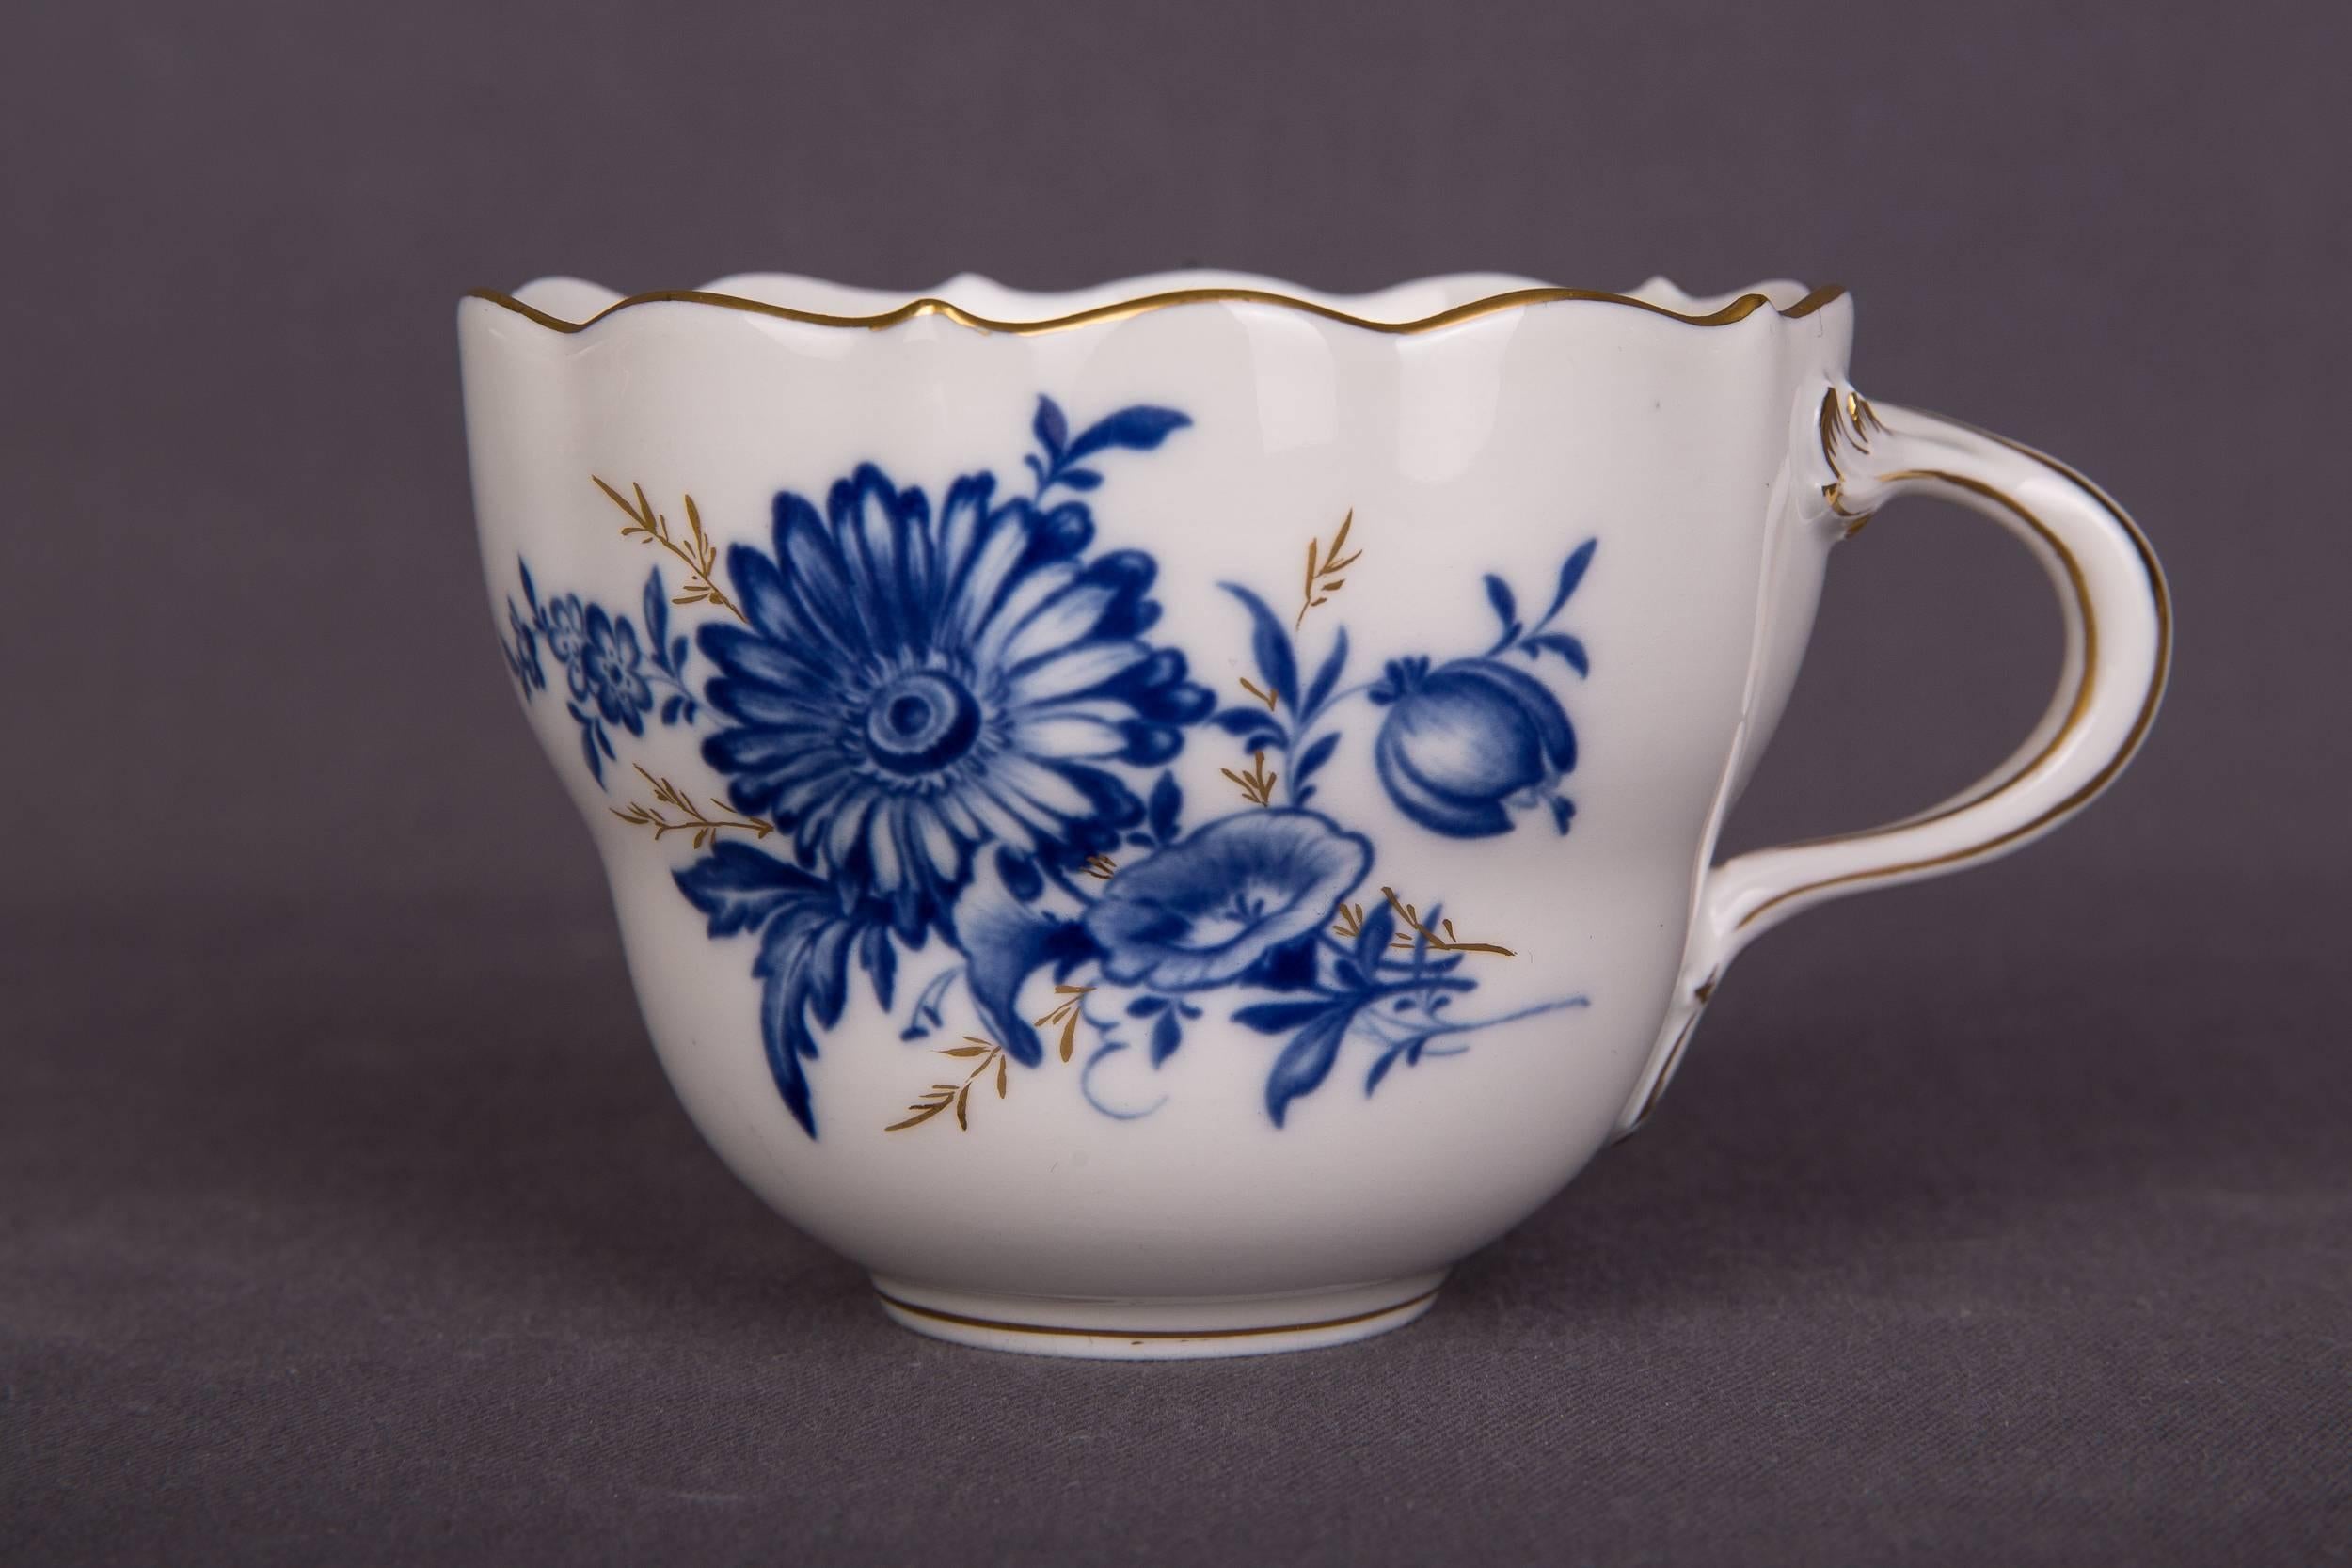 Hand-Painted Comprehensive Meissen Coffee Service Decor Blue Flower with Gold